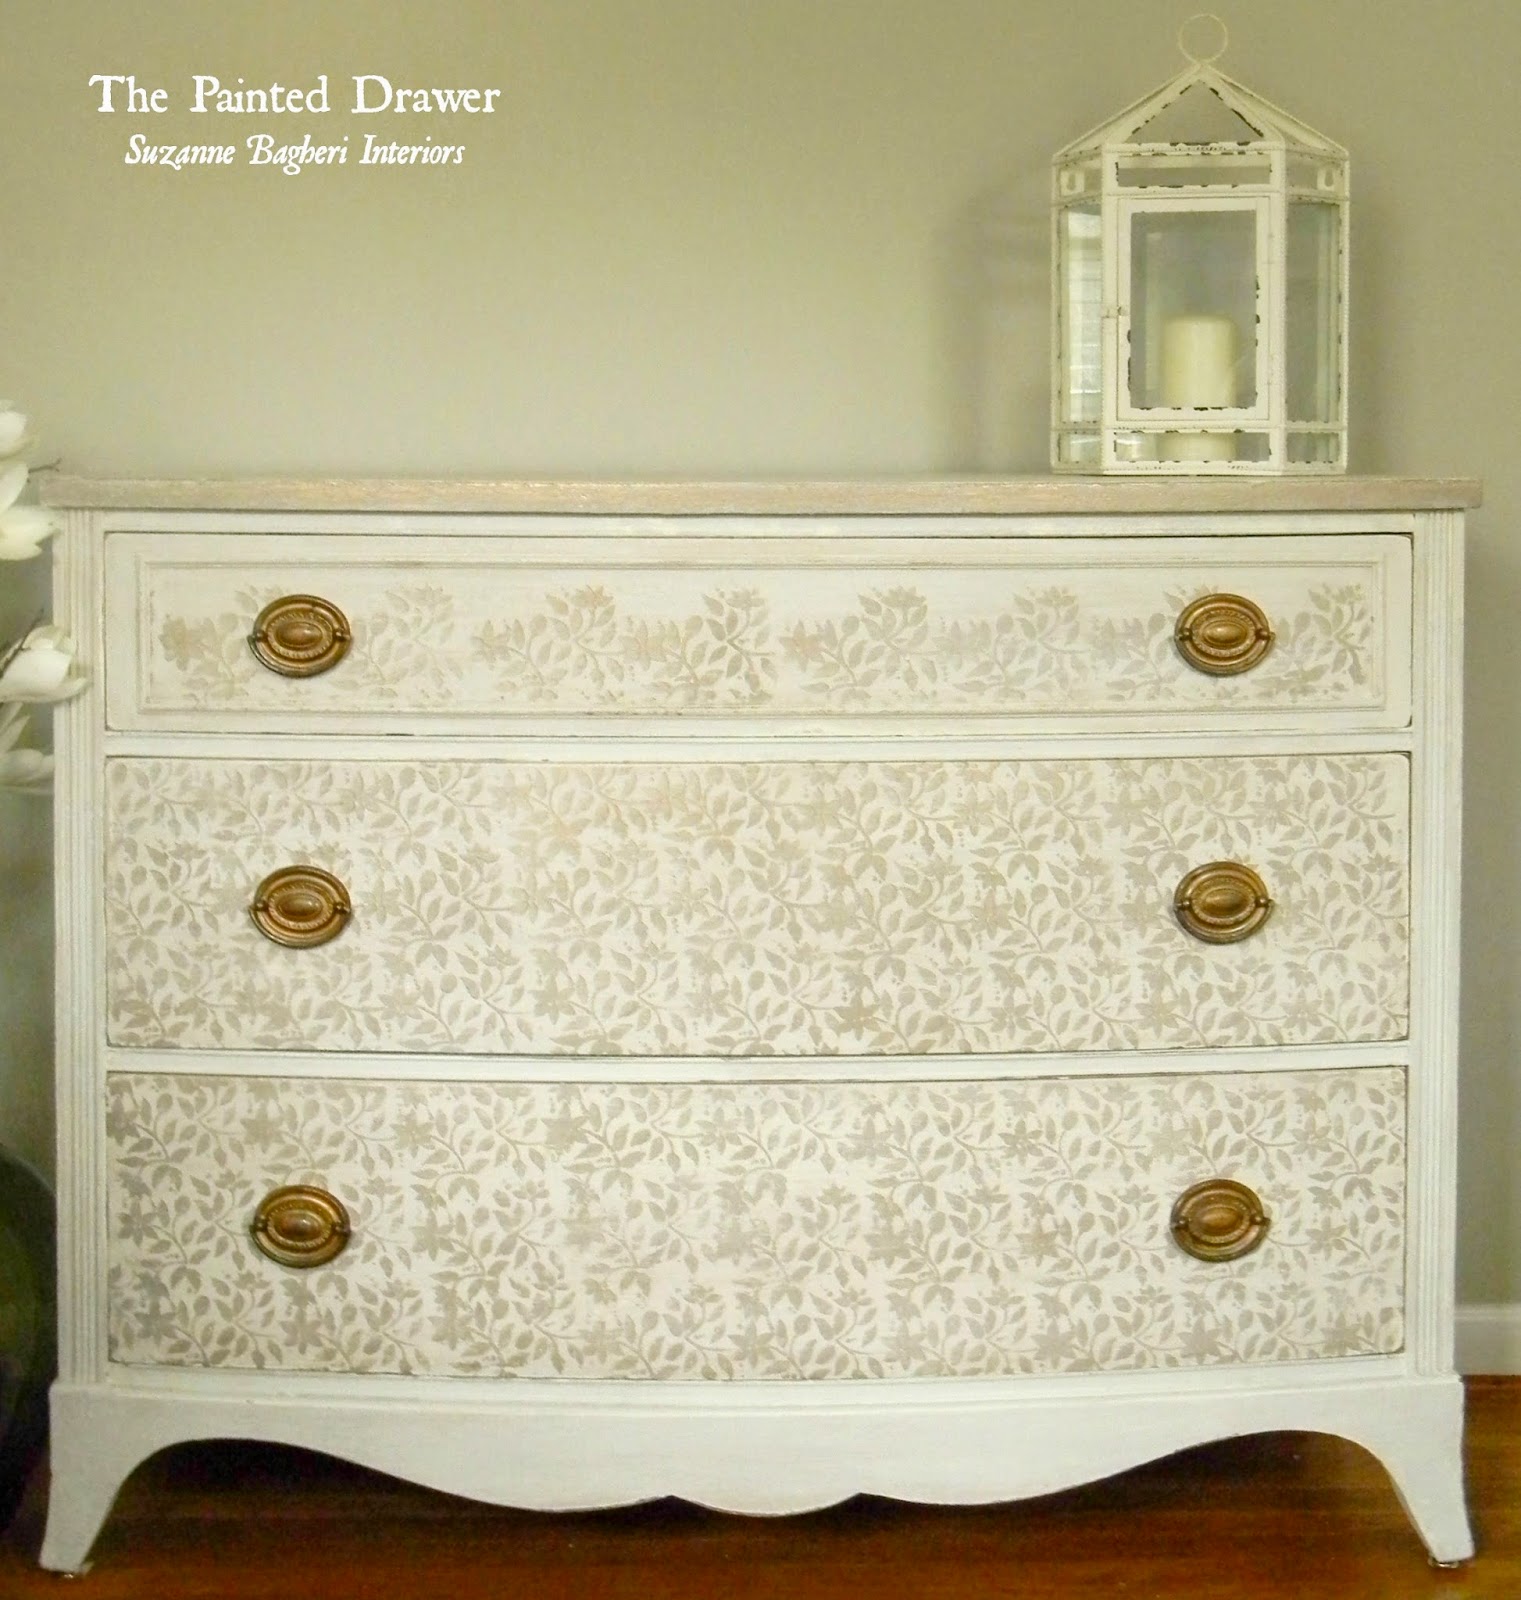 Suzanne from the Painted Drawer creates the loveliest painted treasures, including this stenciled antique dresser.